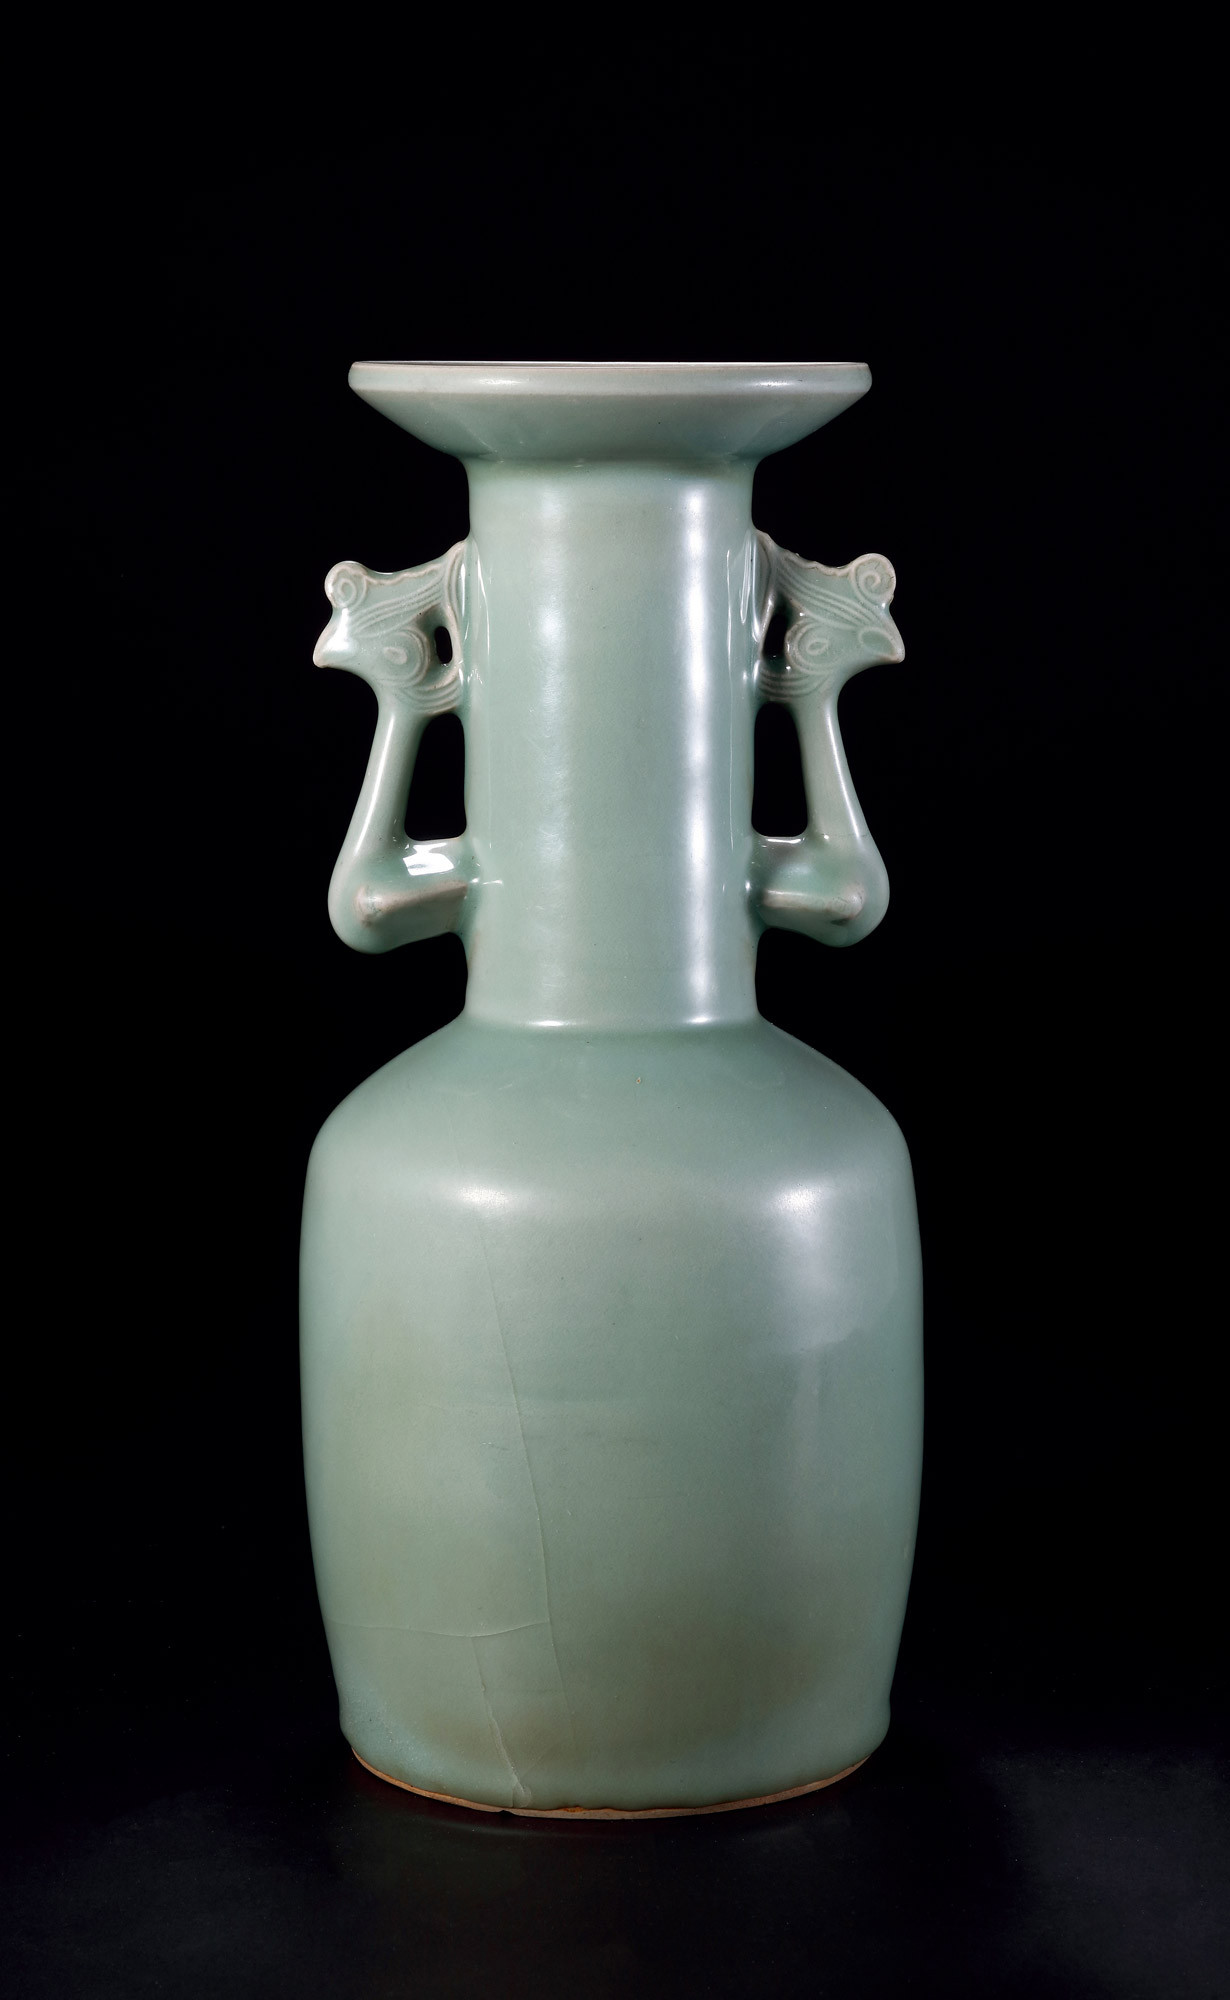 A LARGE LONGQUAN CELADON VASE WITH DISH-SHAPED MOUTH AND PHOENIX-SHAPED HANDLES